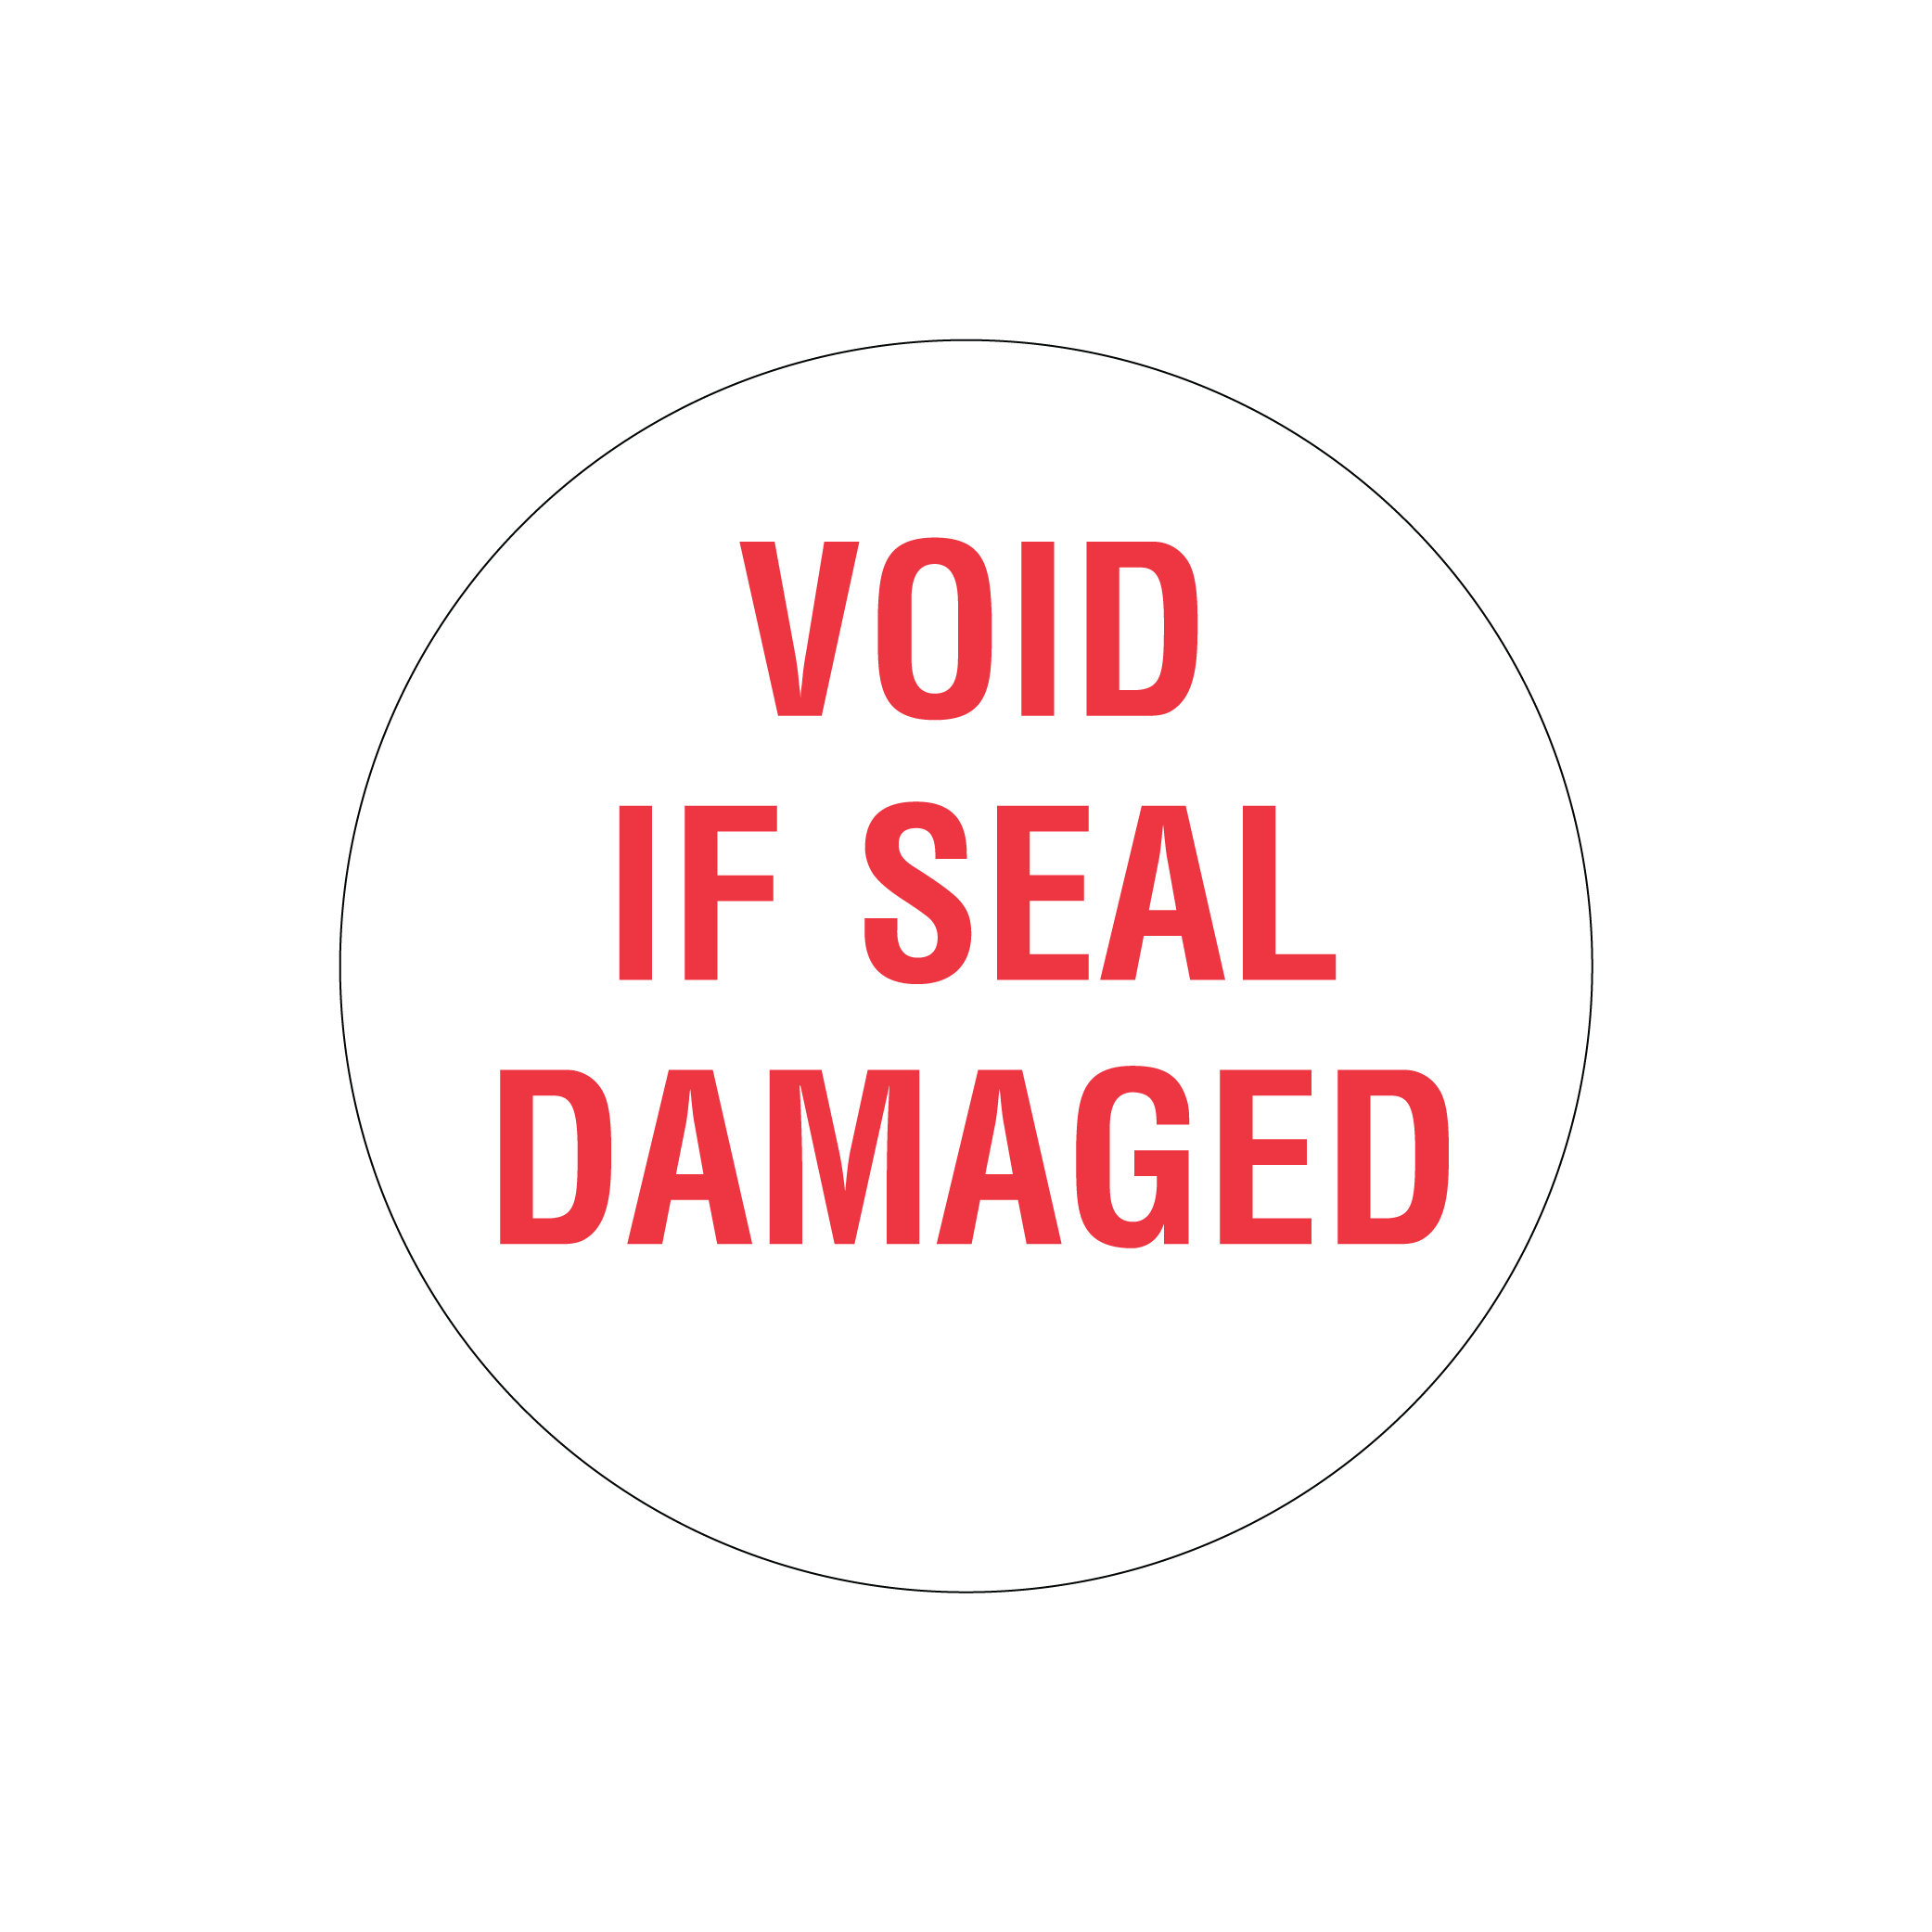 A security seal label reading, "Void if Seal Damaged".